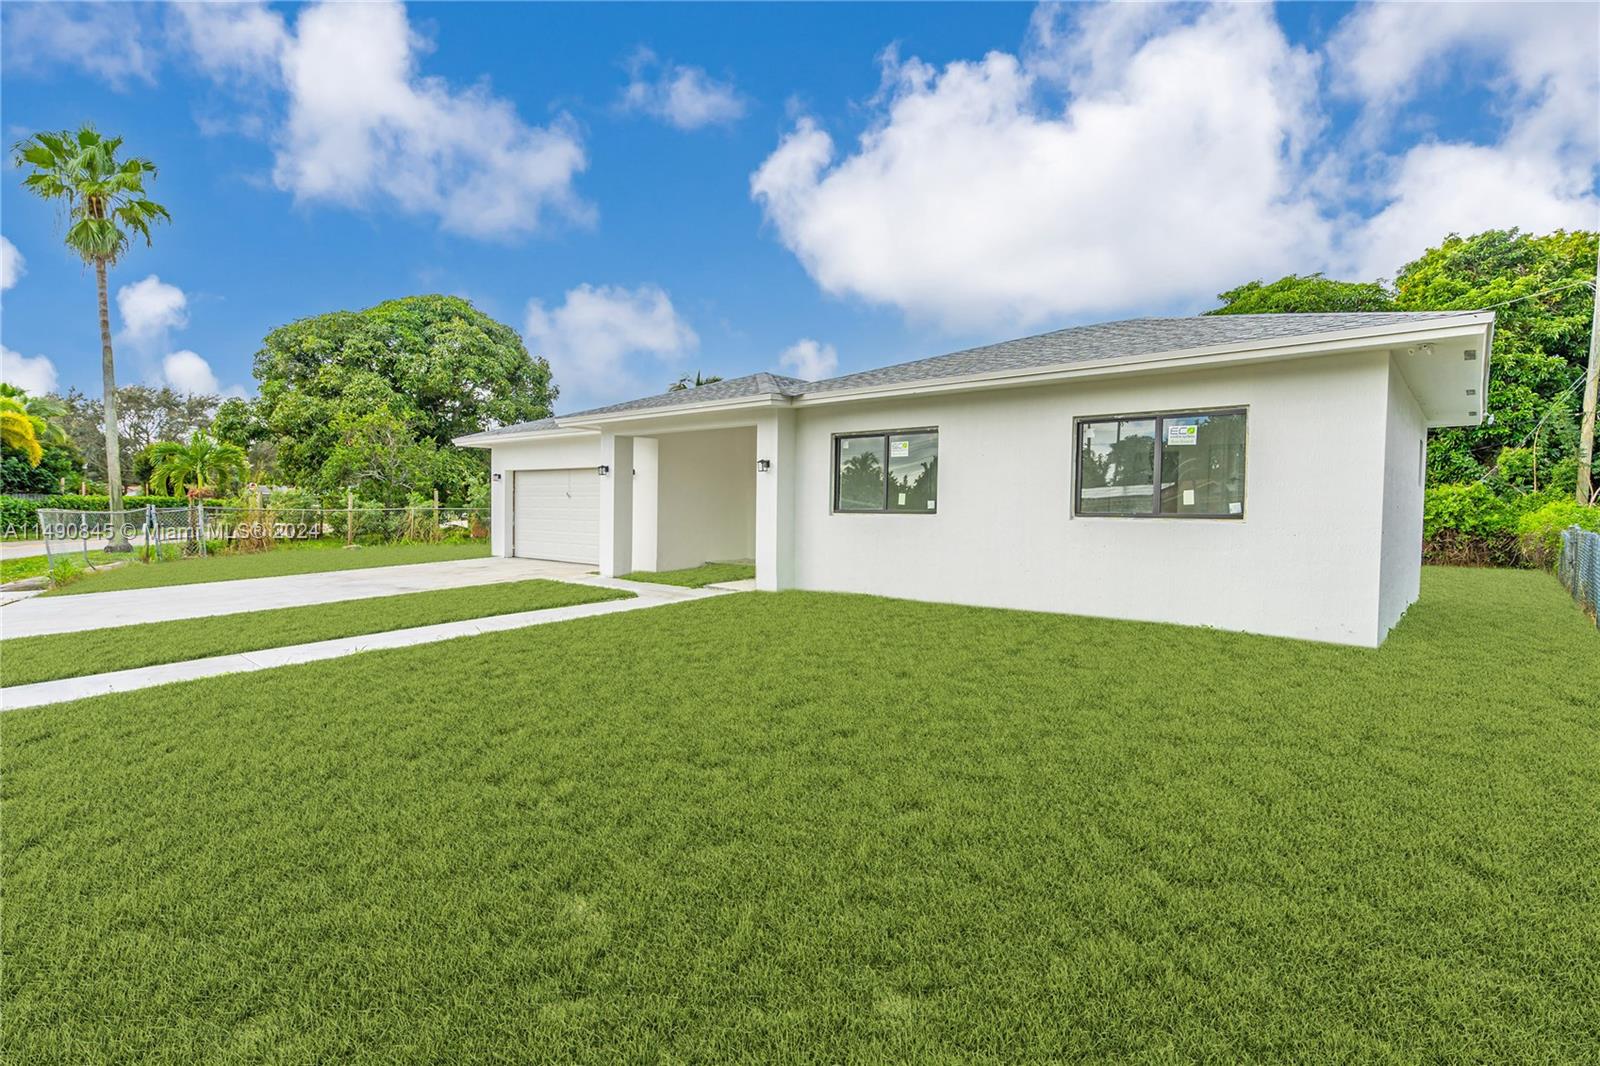 Property for Sale at 1511 Nw 10th Ave, Fort Lauderdale, Broward County, Florida - Bedrooms: 4 
Bathrooms: 2  - $625,000